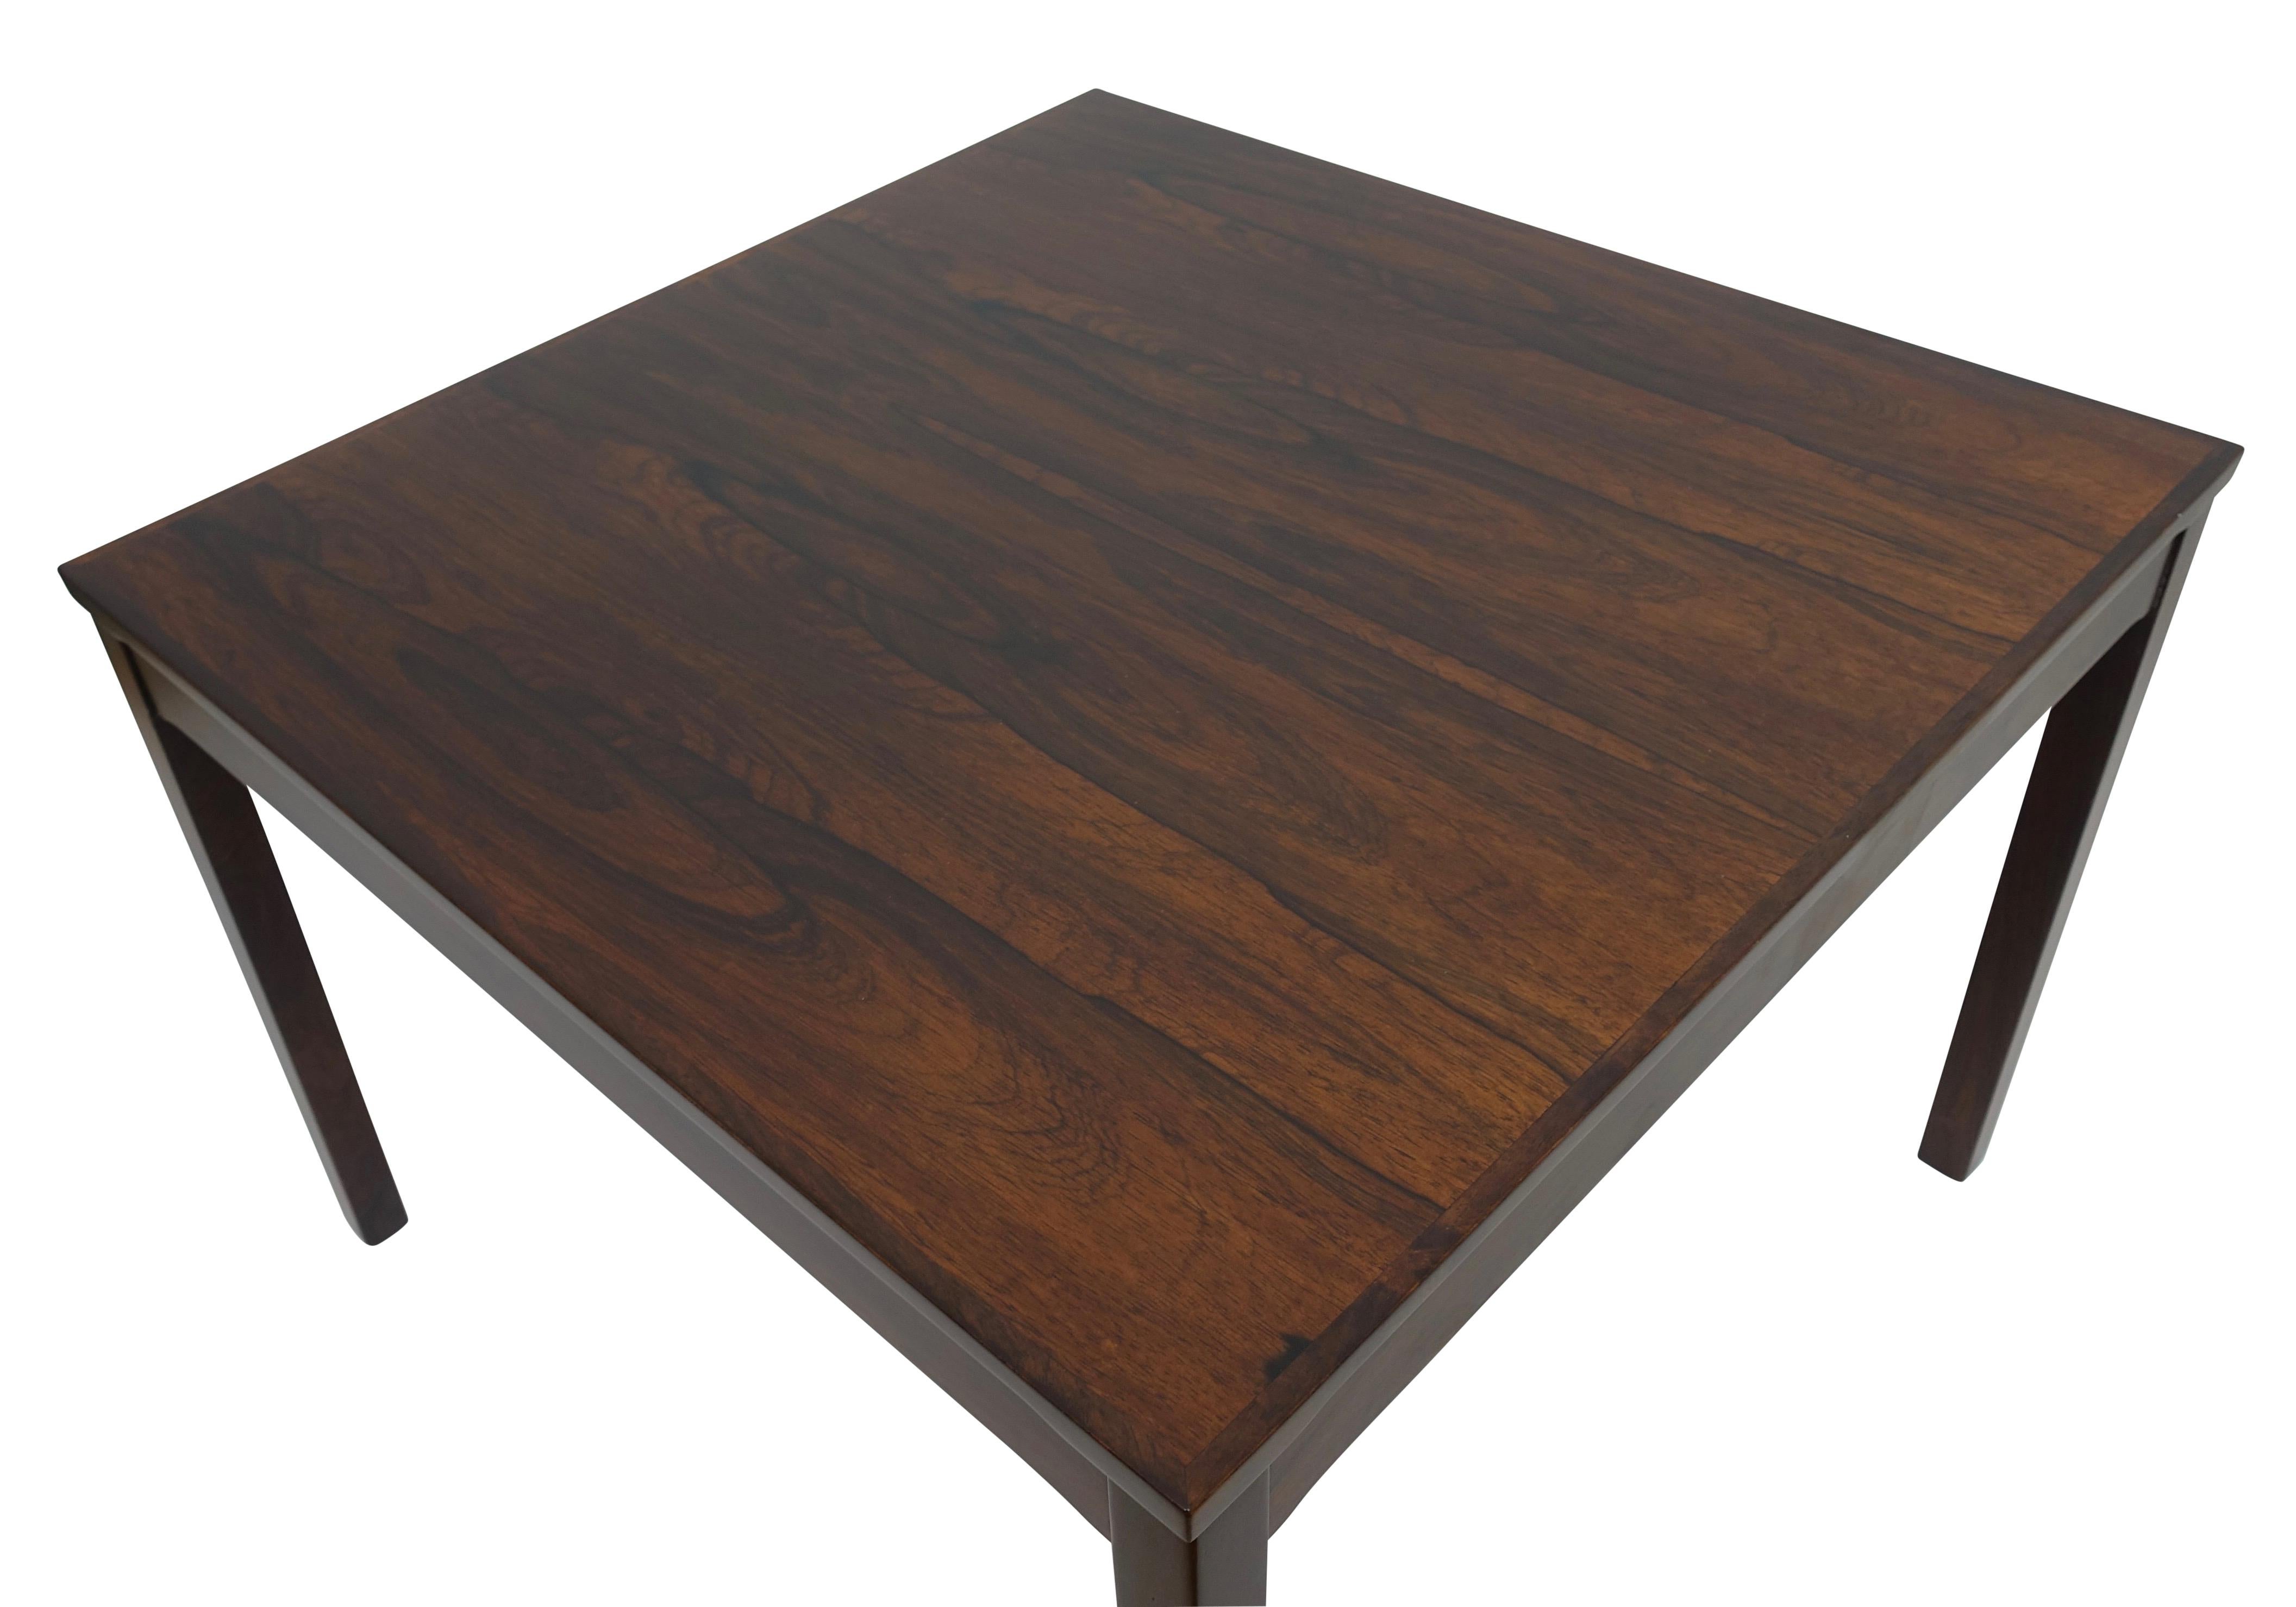 bookmatched rosewood square shape coffee table, having square rosewood legs. Simplicity at its most intriguing. Original Haug Snekkeri label on the underside, as seen in the photo's. Norway, mid to late 20th century.